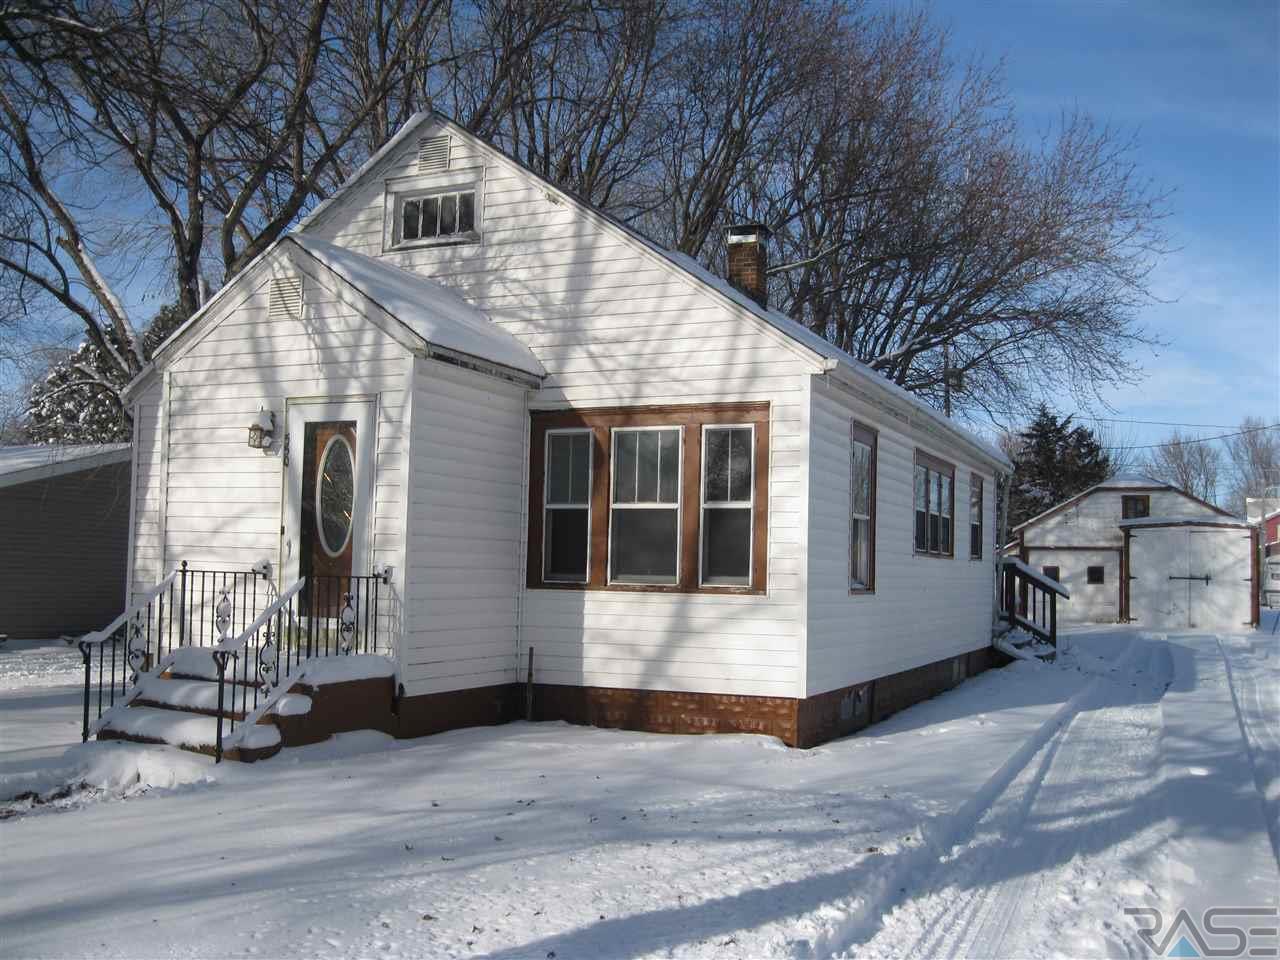 SOLD! 550 W. Wood St, Canistota, SD 57012